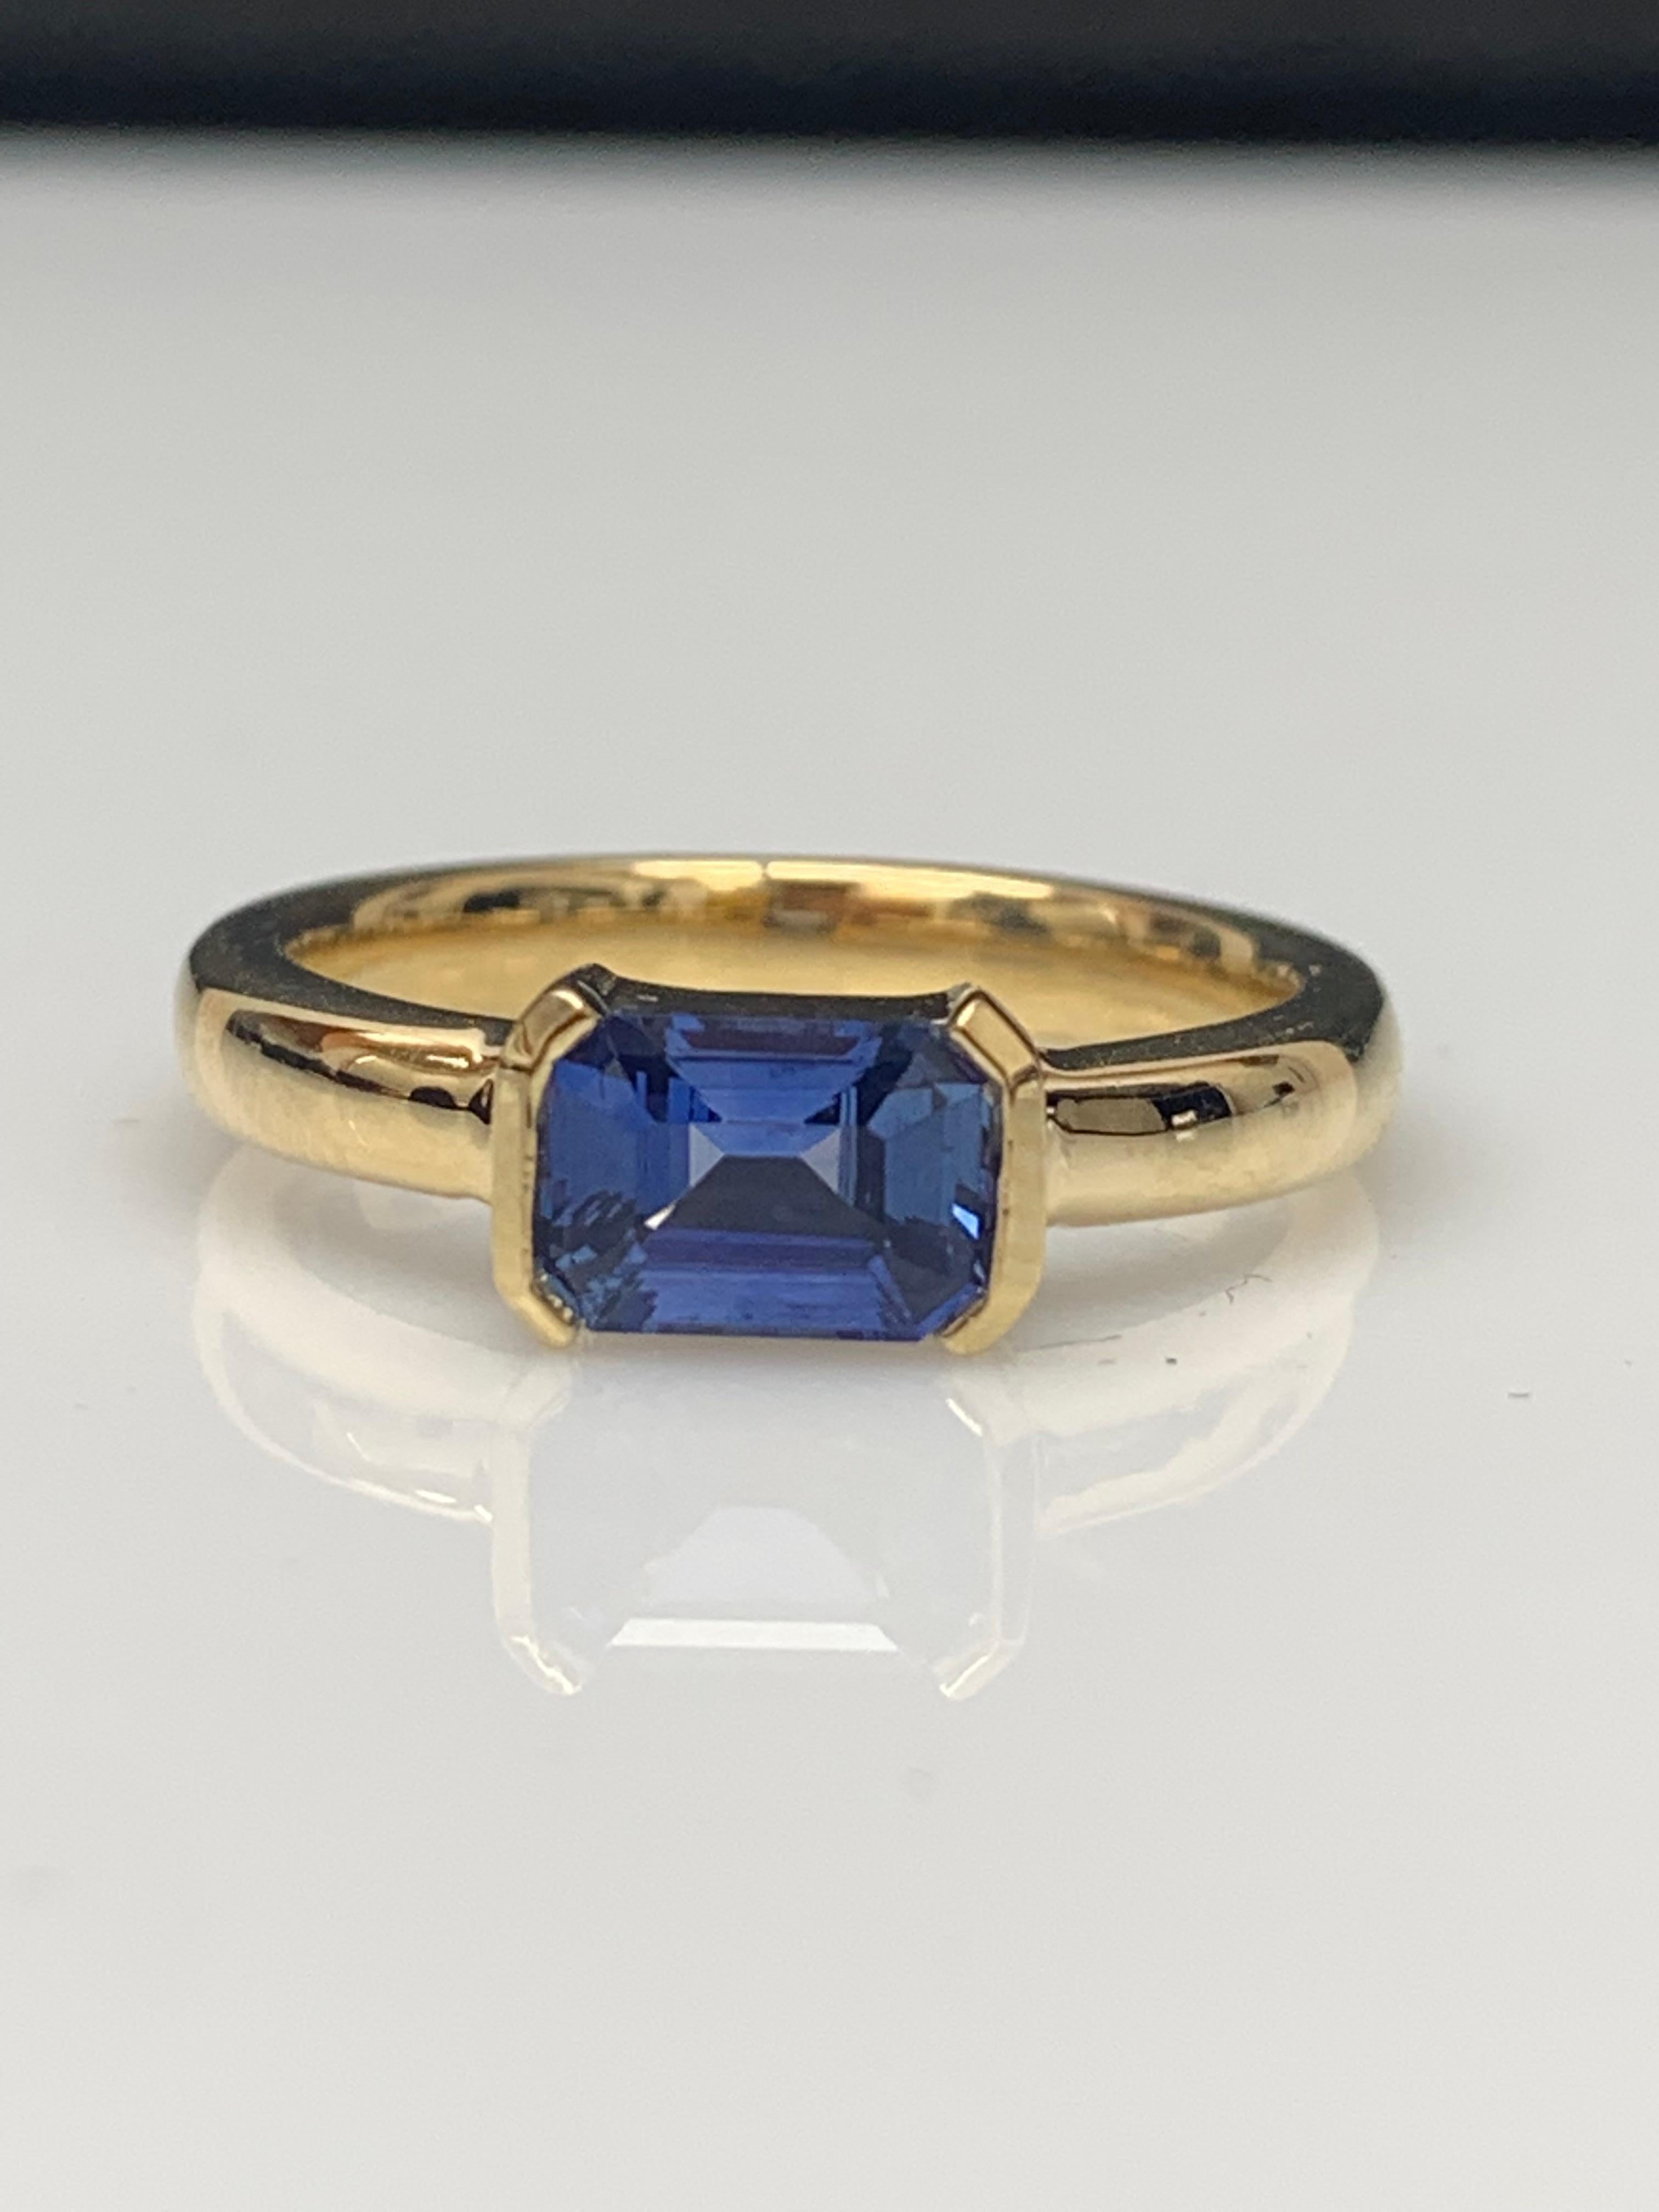 1.06 Carat Emerald Cut Blue Sapphire Band Ring in 14K Yellow Gold For Sale 4